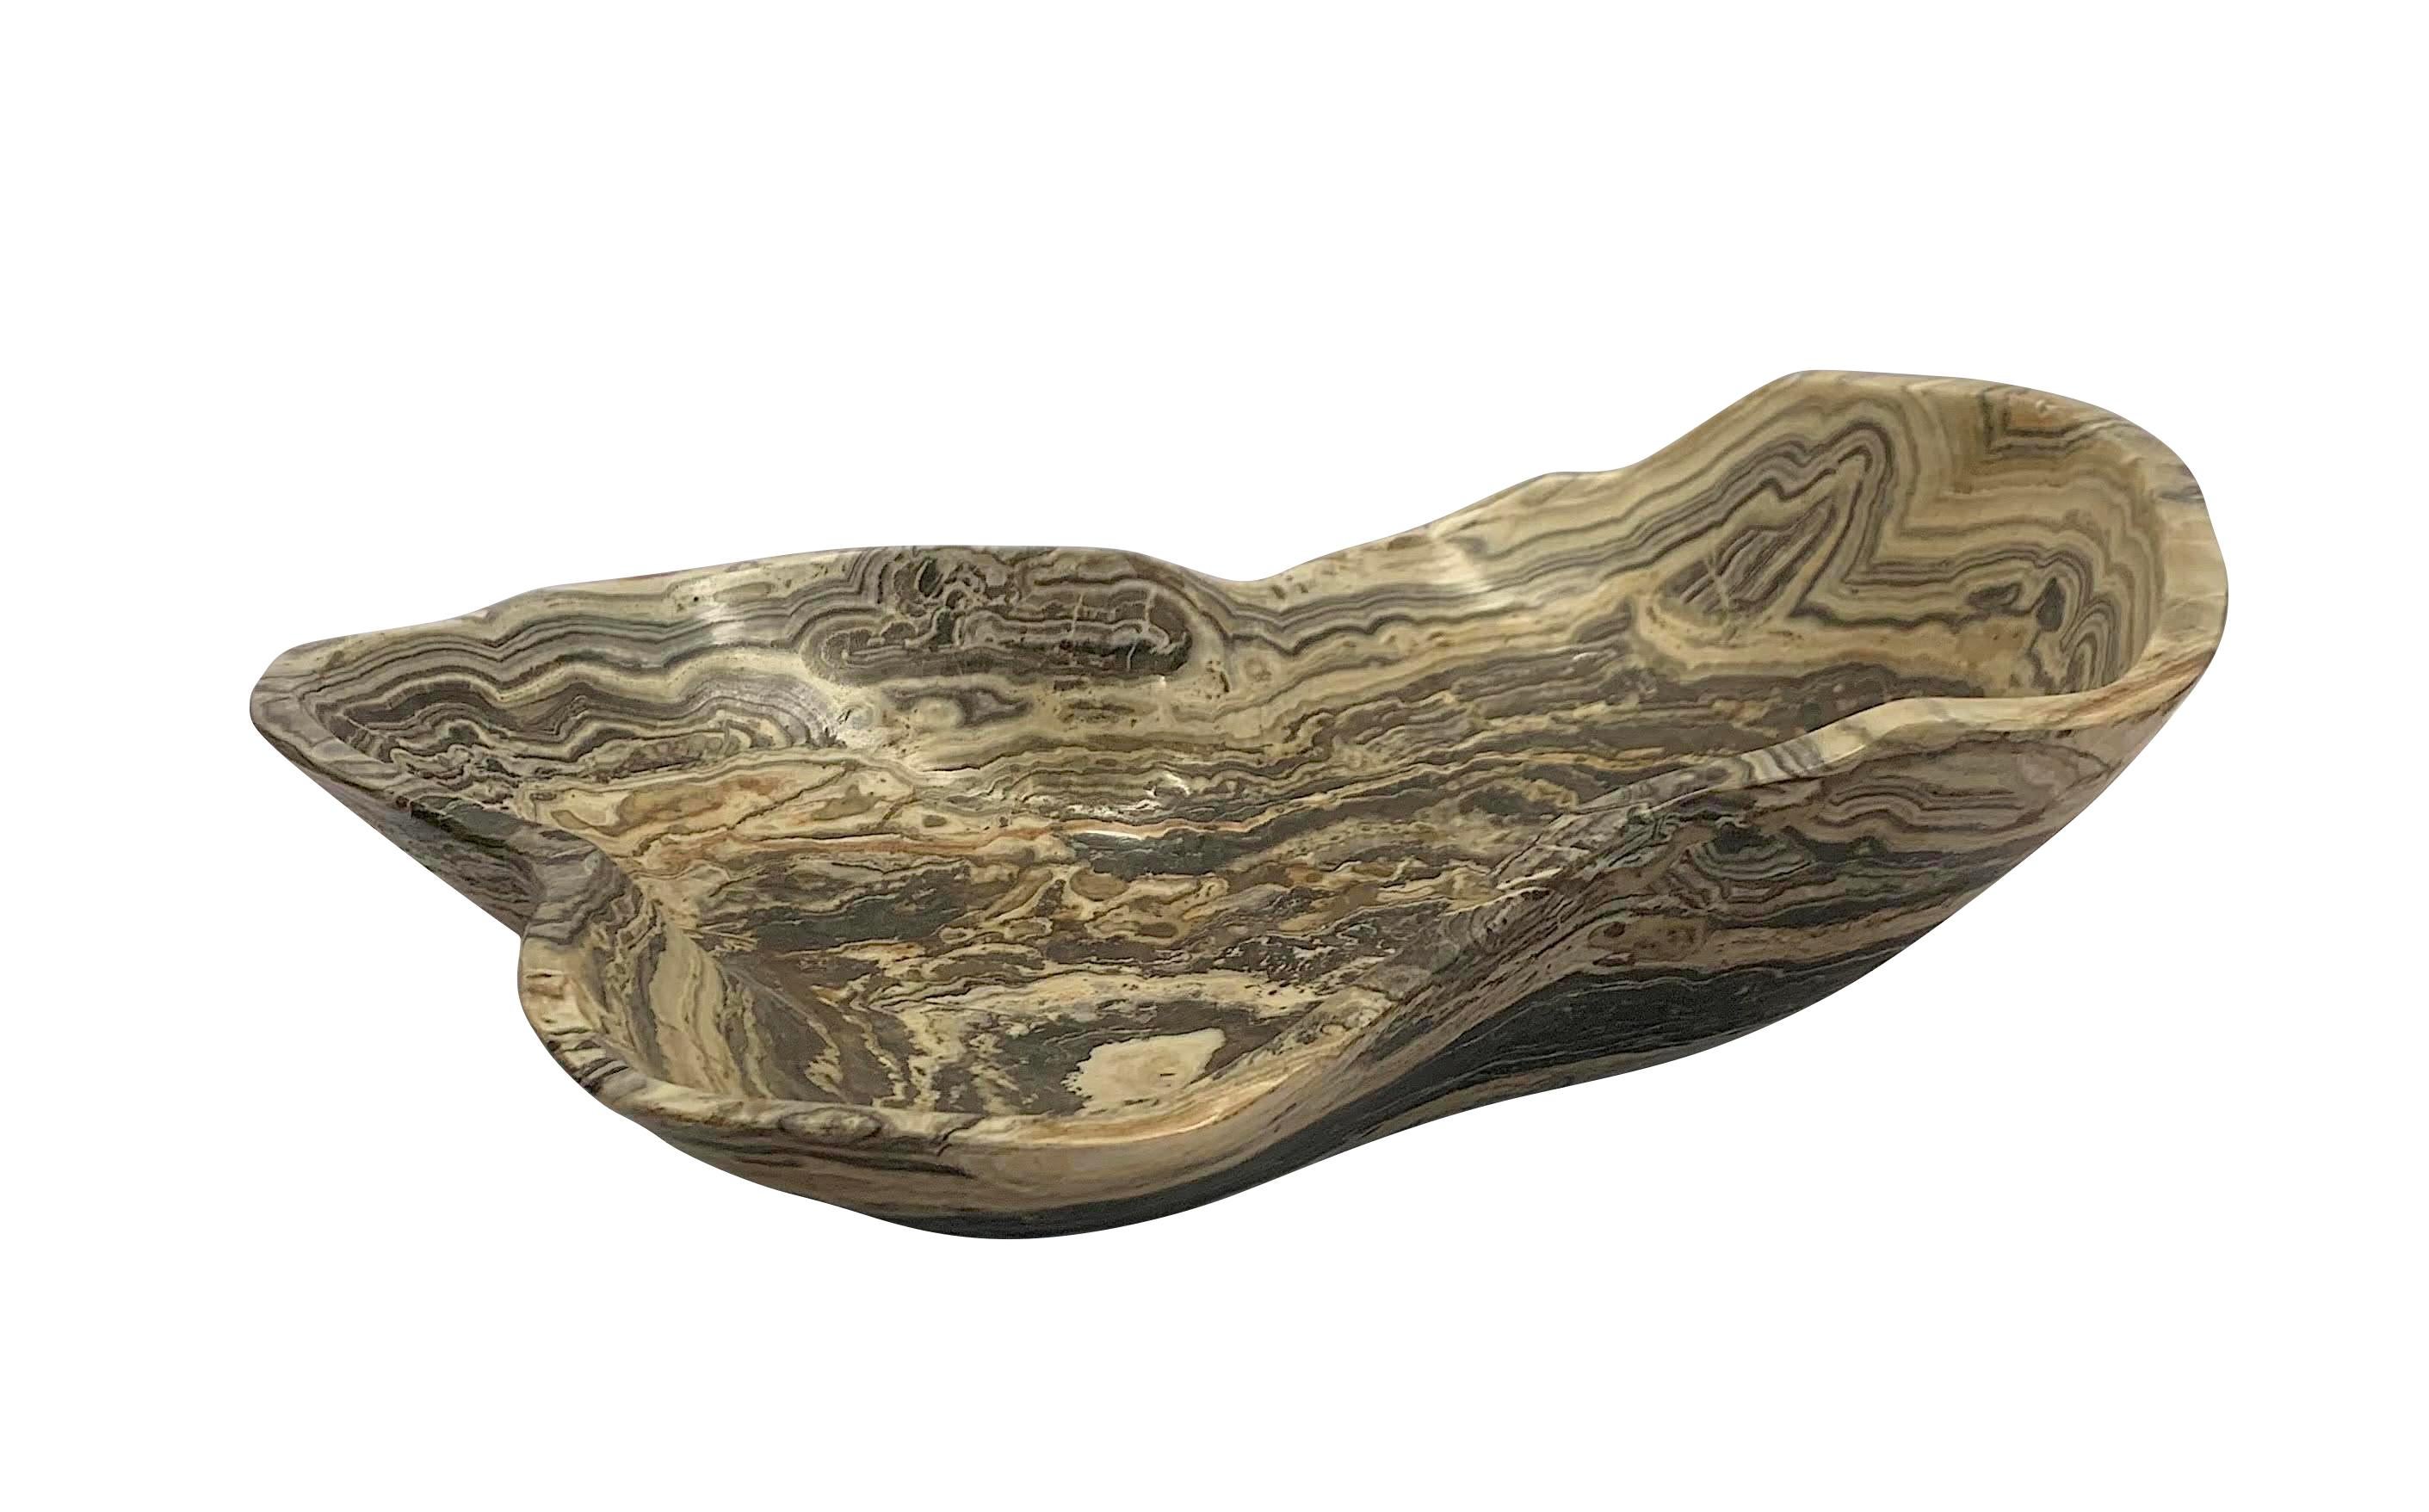 Contemporary Moroccan free form shaped onyx bowl.
Grey and off white in color.
From a large collection of different shapes, sizes and colors.